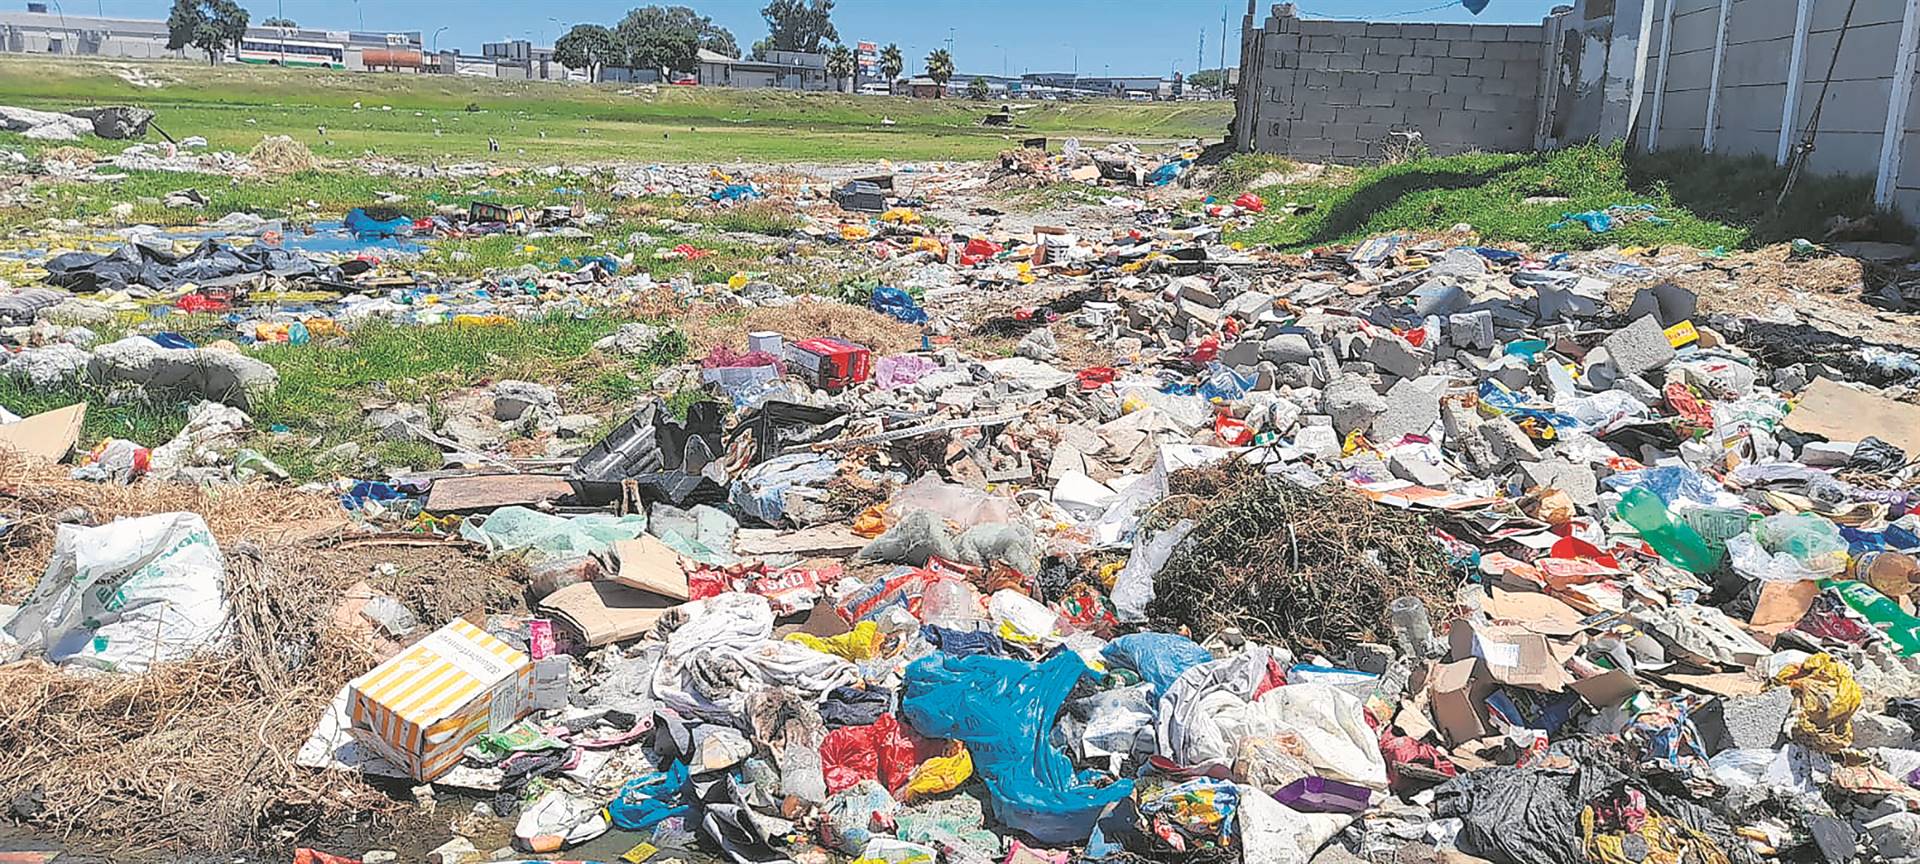 Residents of Crossroads have had enough of people and vehicles dumping rubbish at this open field near their homes.      Photo by Lulekwa Mbadamane